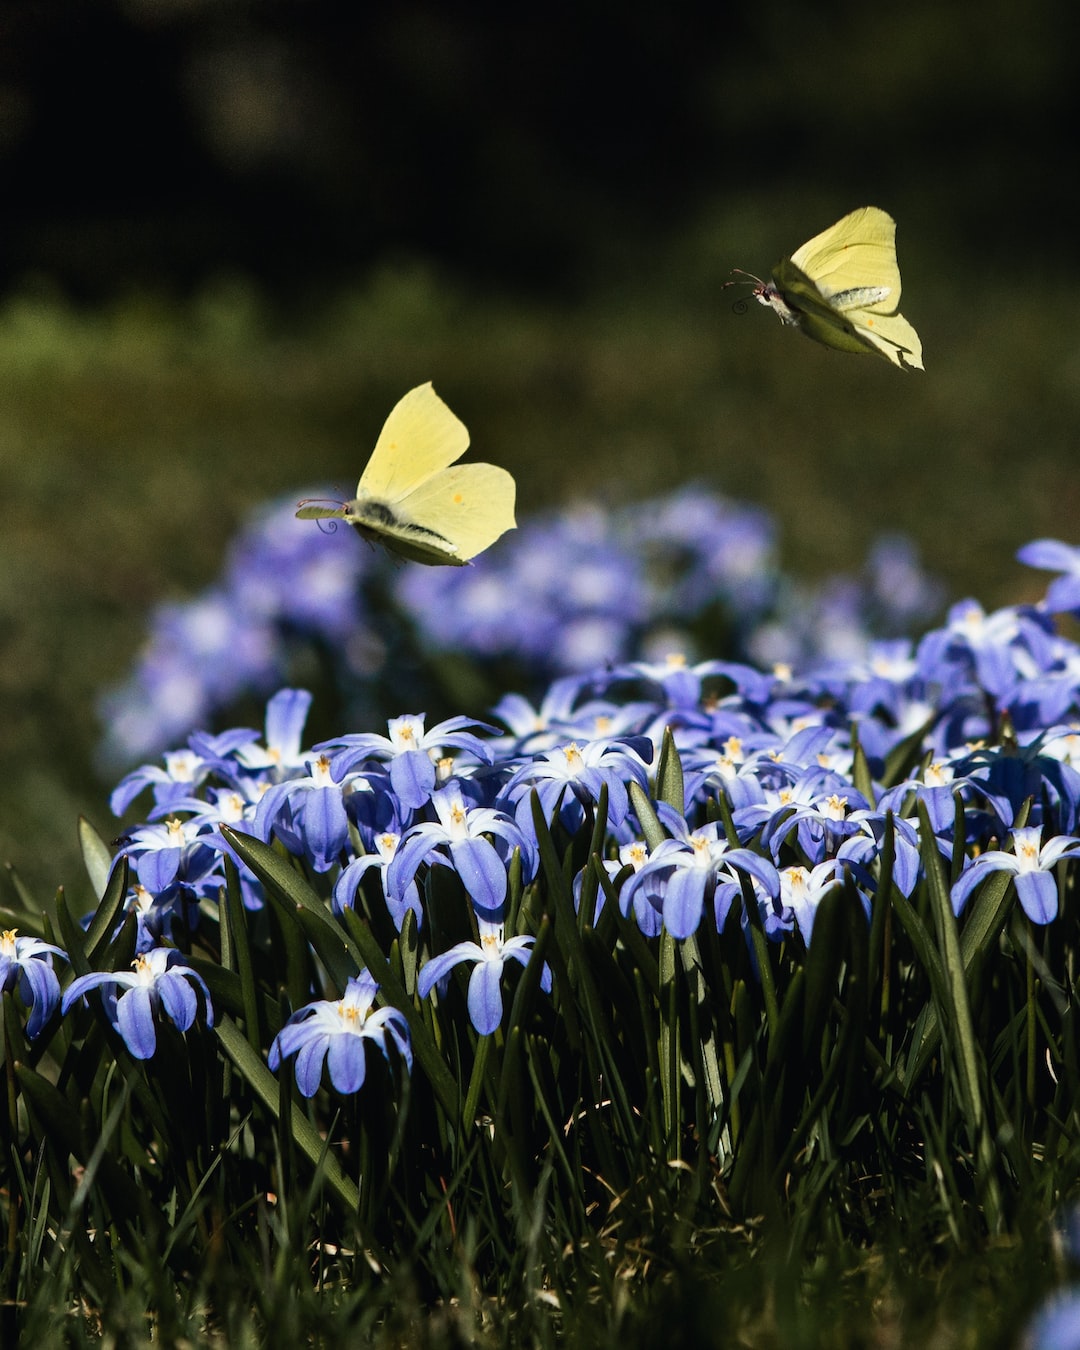 two butterflies flying over a field of blue flowers